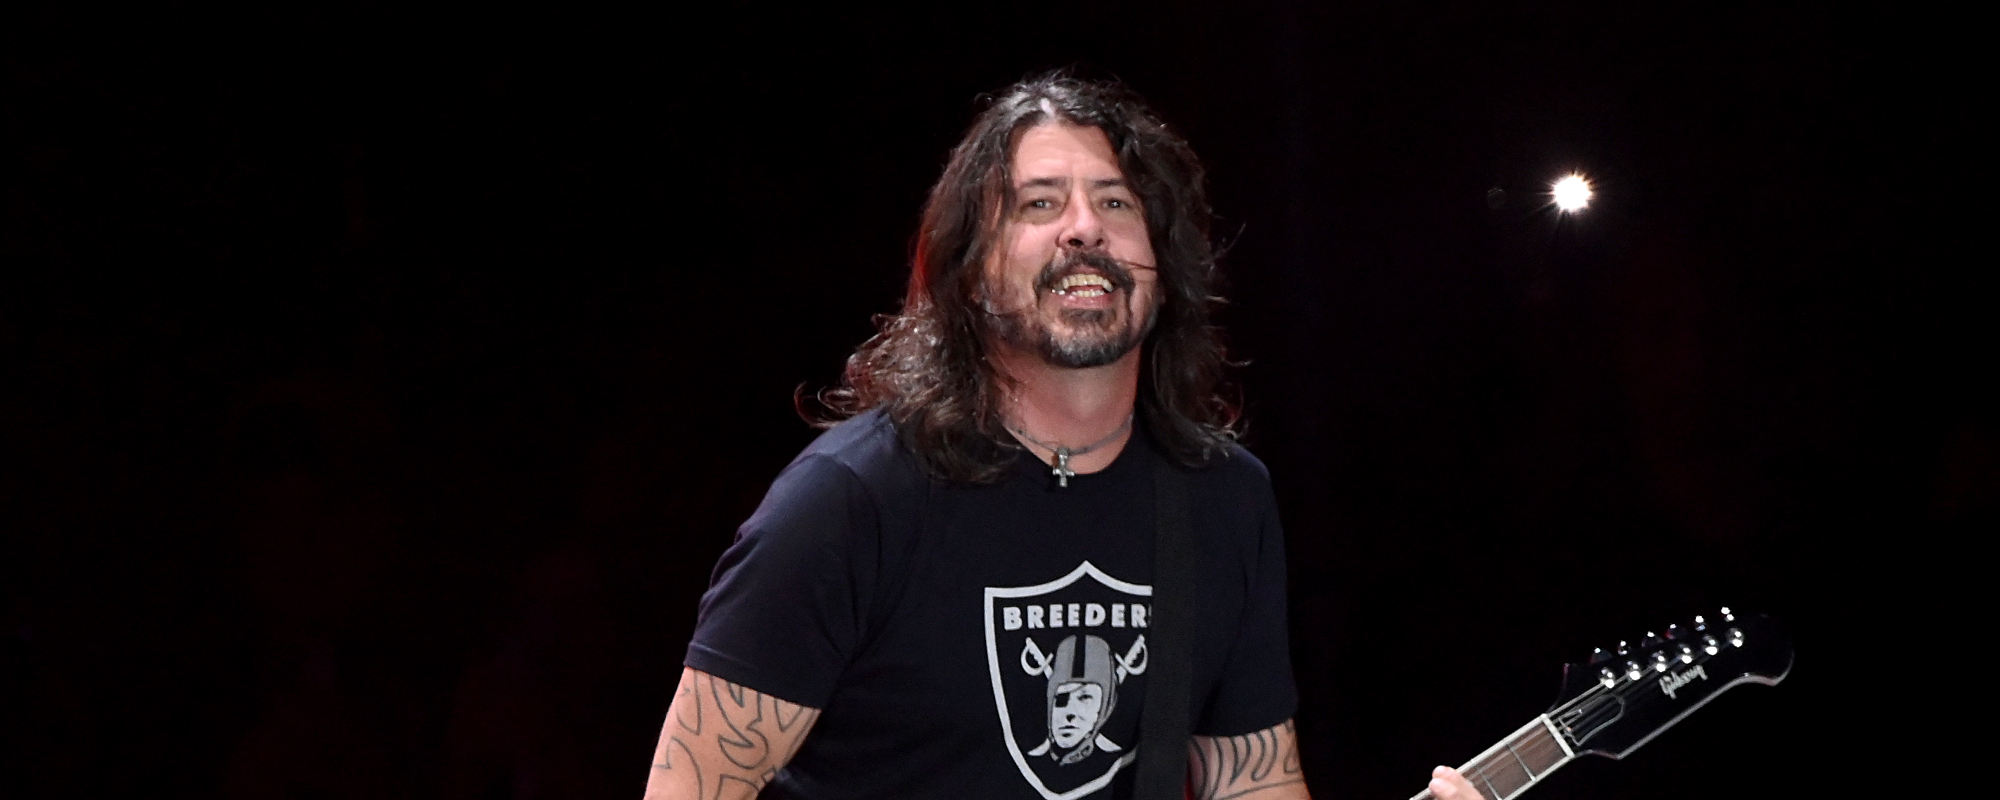 Dave Grohl Raises Thousands for Charity With Silly DIY Sharpie Artwork